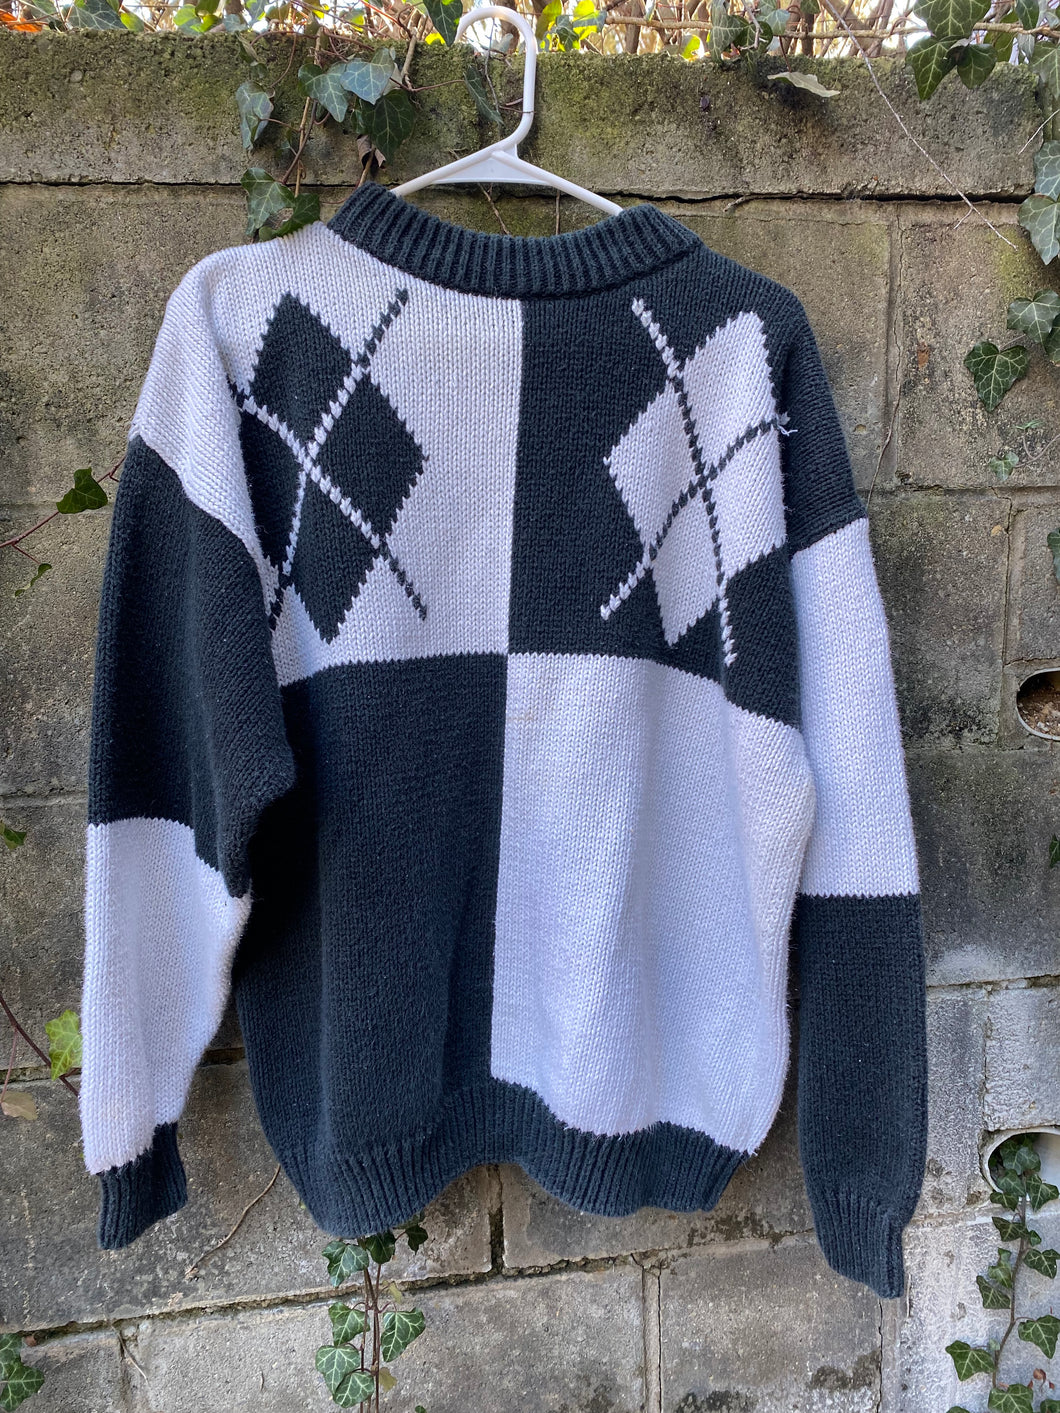 Black and White knit sweater